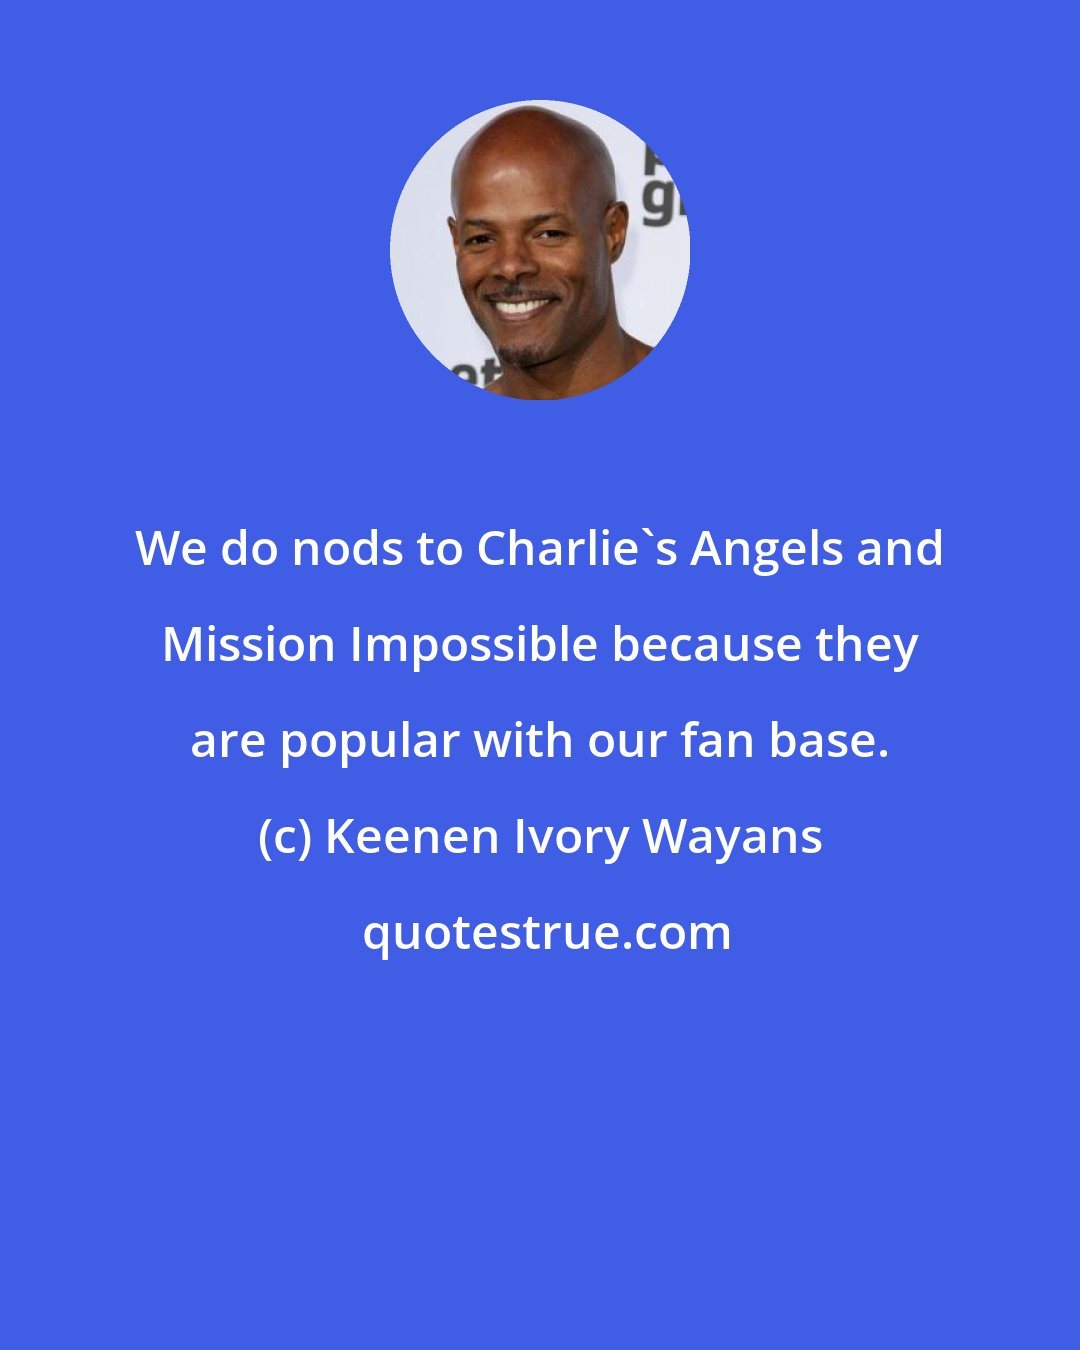 Keenen Ivory Wayans: We do nods to Charlie's Angels and Mission Impossible because they are popular with our fan base.